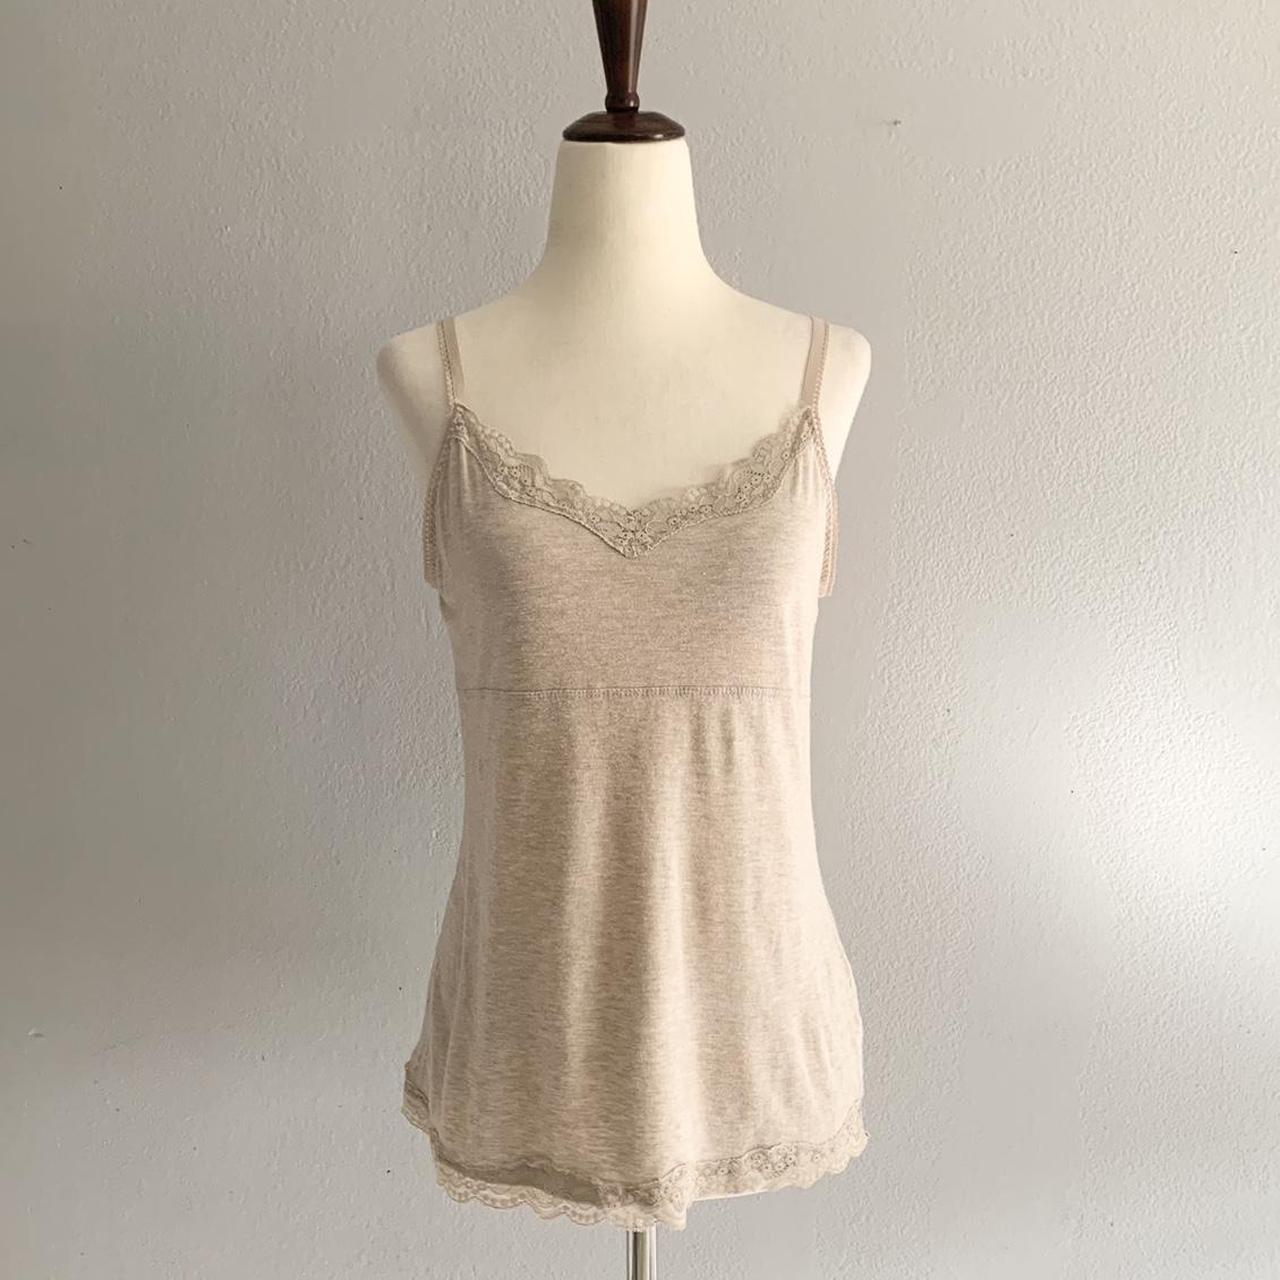 Delicate Cream Floral Lace See-Through Cami Top - Depop